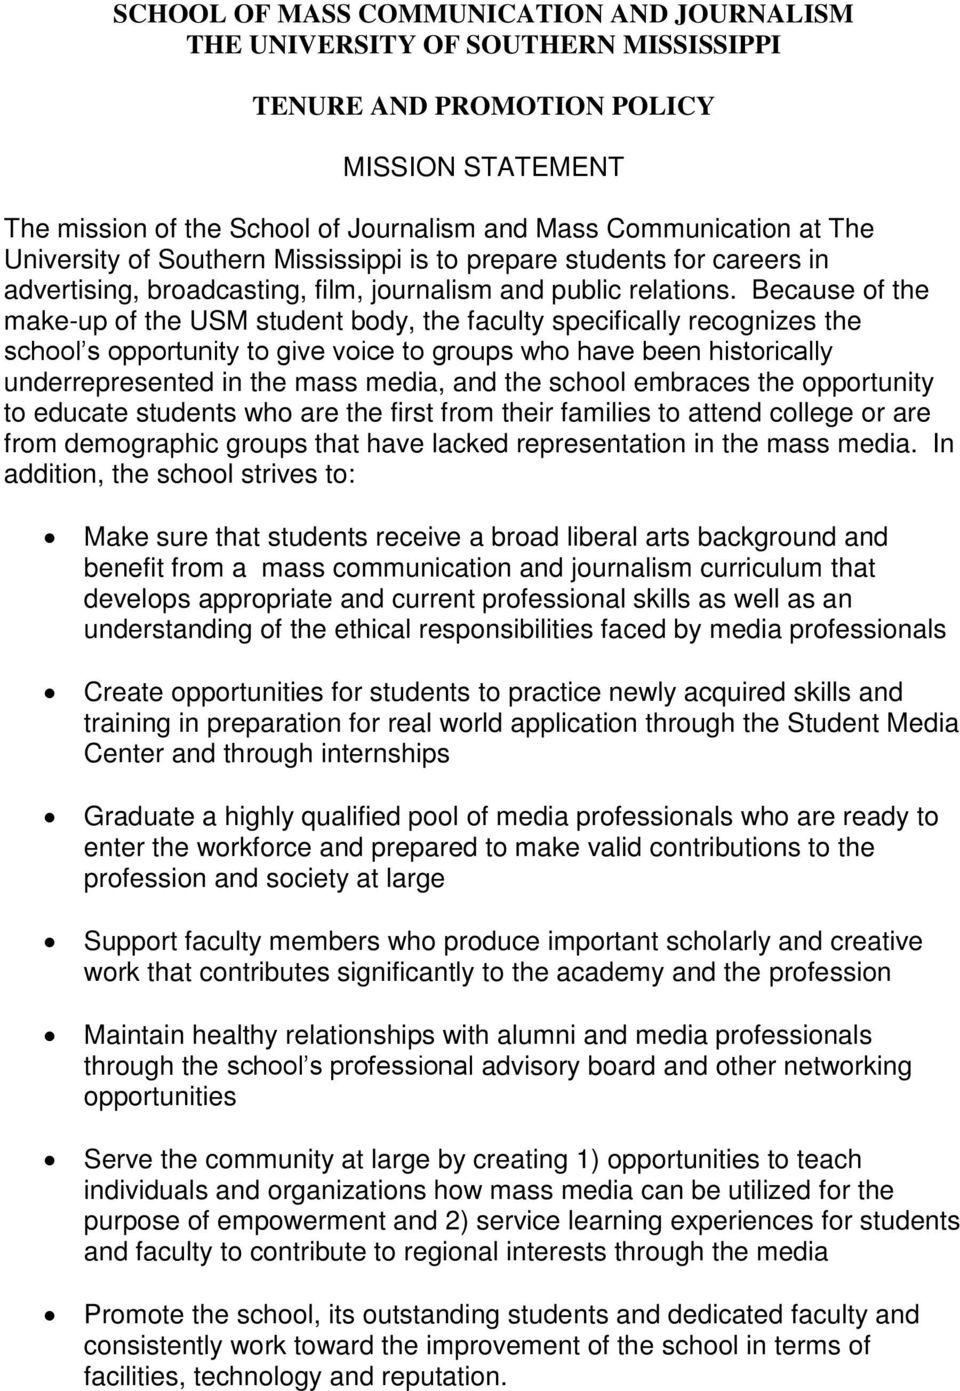 Because of the make-up of the USM student body, the faculty specifically recognizes the school s opportunity to give voice to groups who have been historically underrepresented in the mass media, and